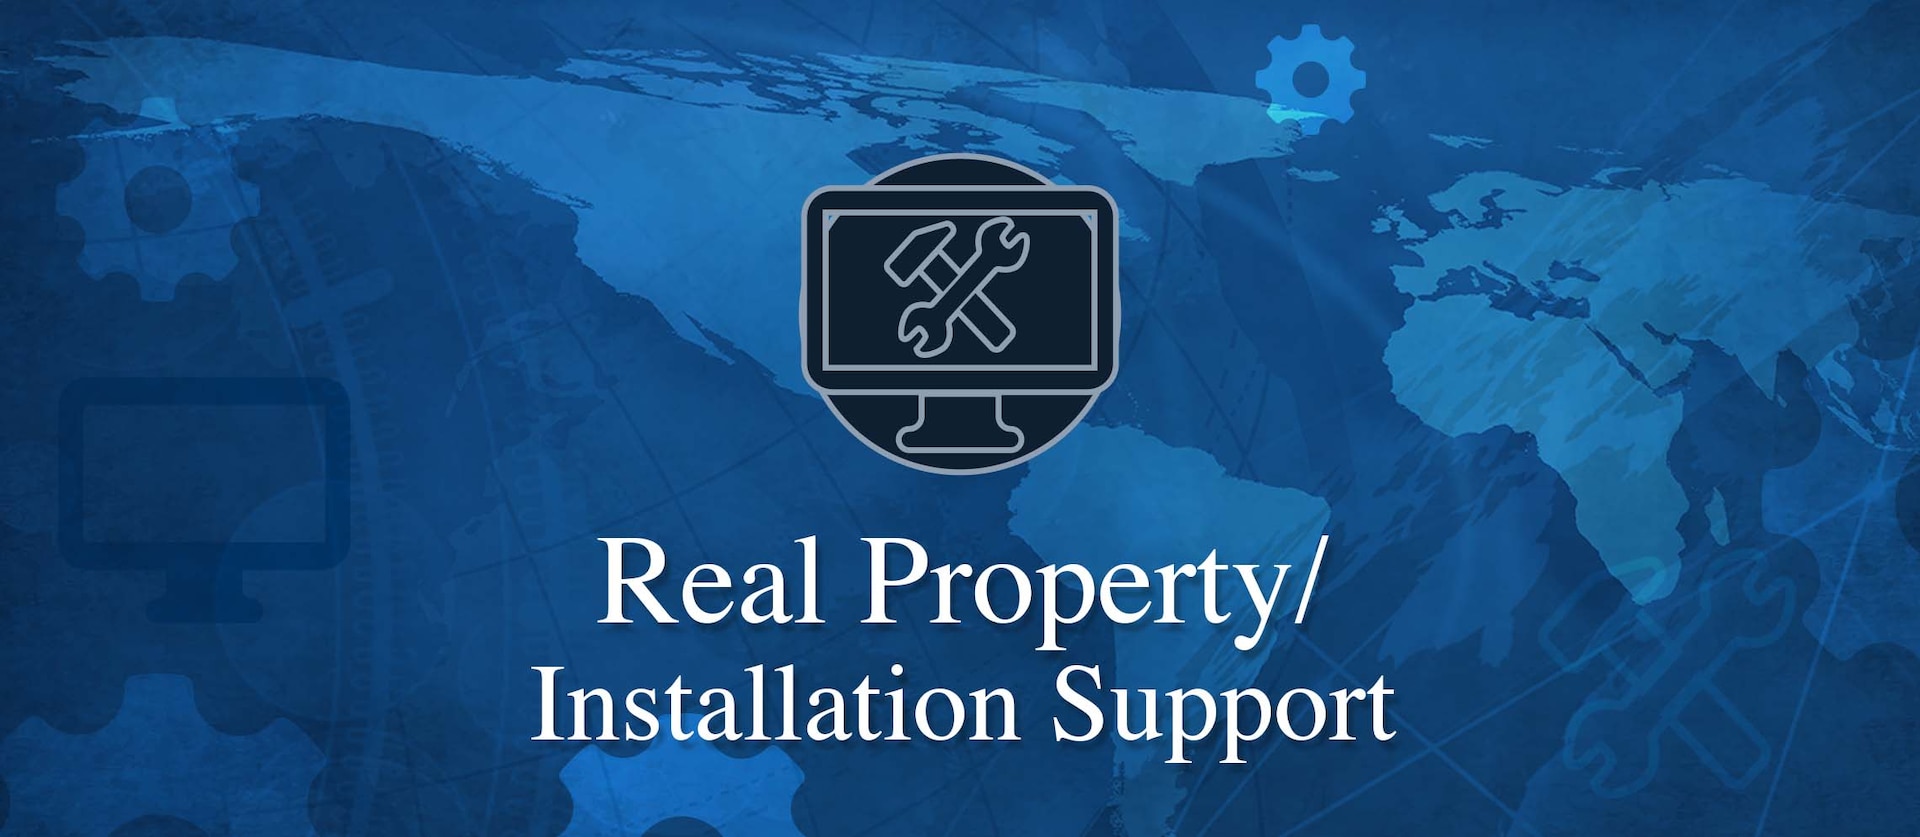 Banner graphic for Real Property/Installation Support application